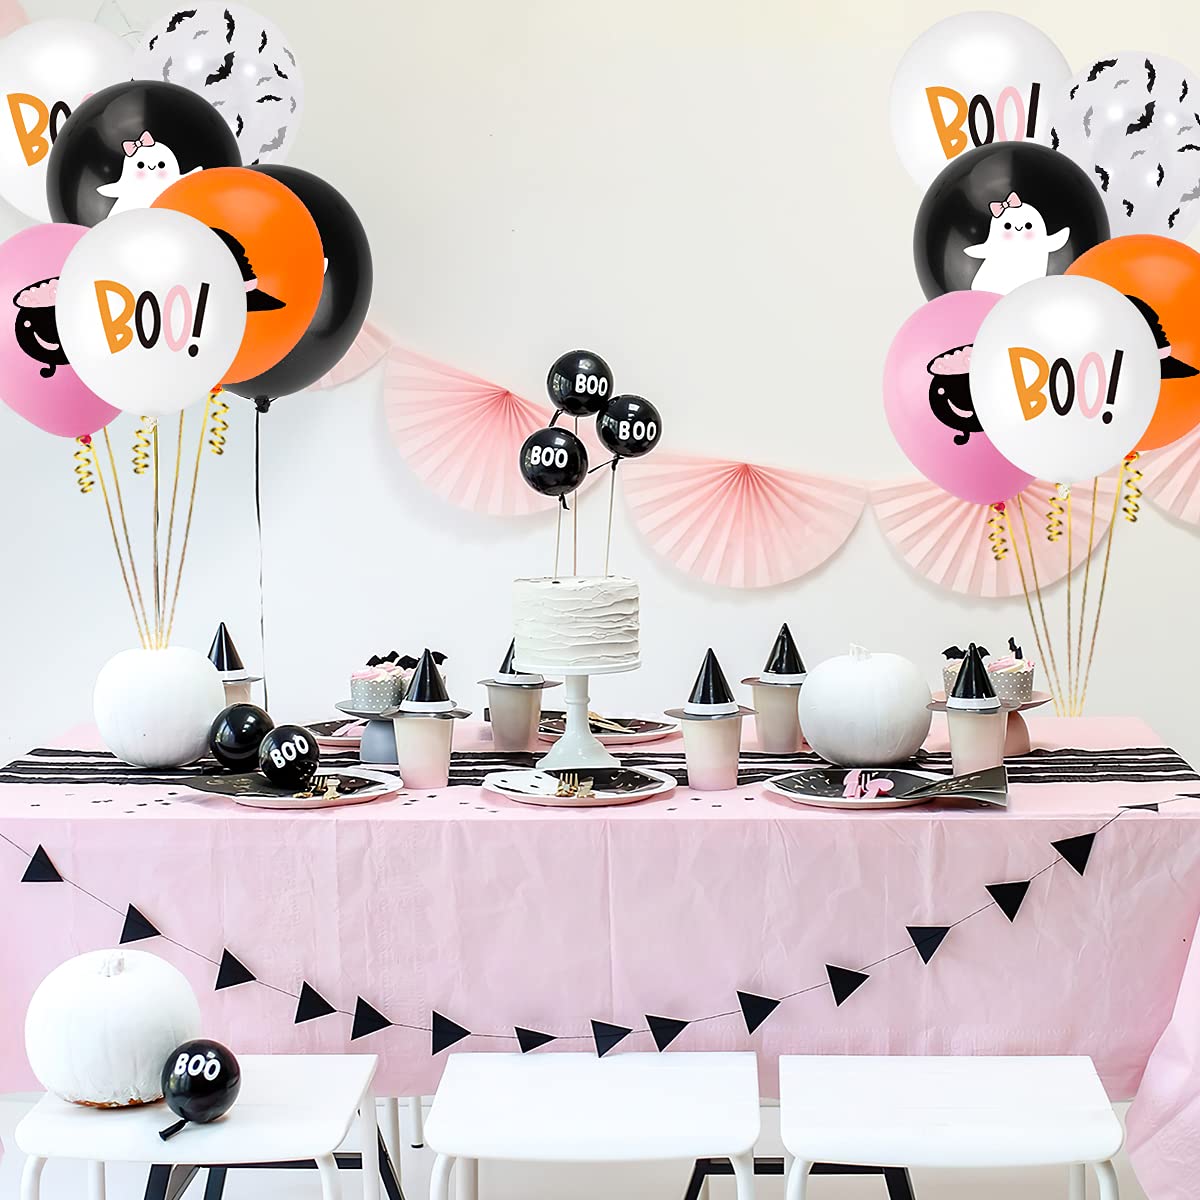 50Pcs Halloween Balloons, Halloween Pink Orange Black White Latex Balloons with Cute Ghost,Wizard hat,Black Bat Design for Halloween Party Favors,Little Boo Baby Shower,Halloween Birthday Party Decor